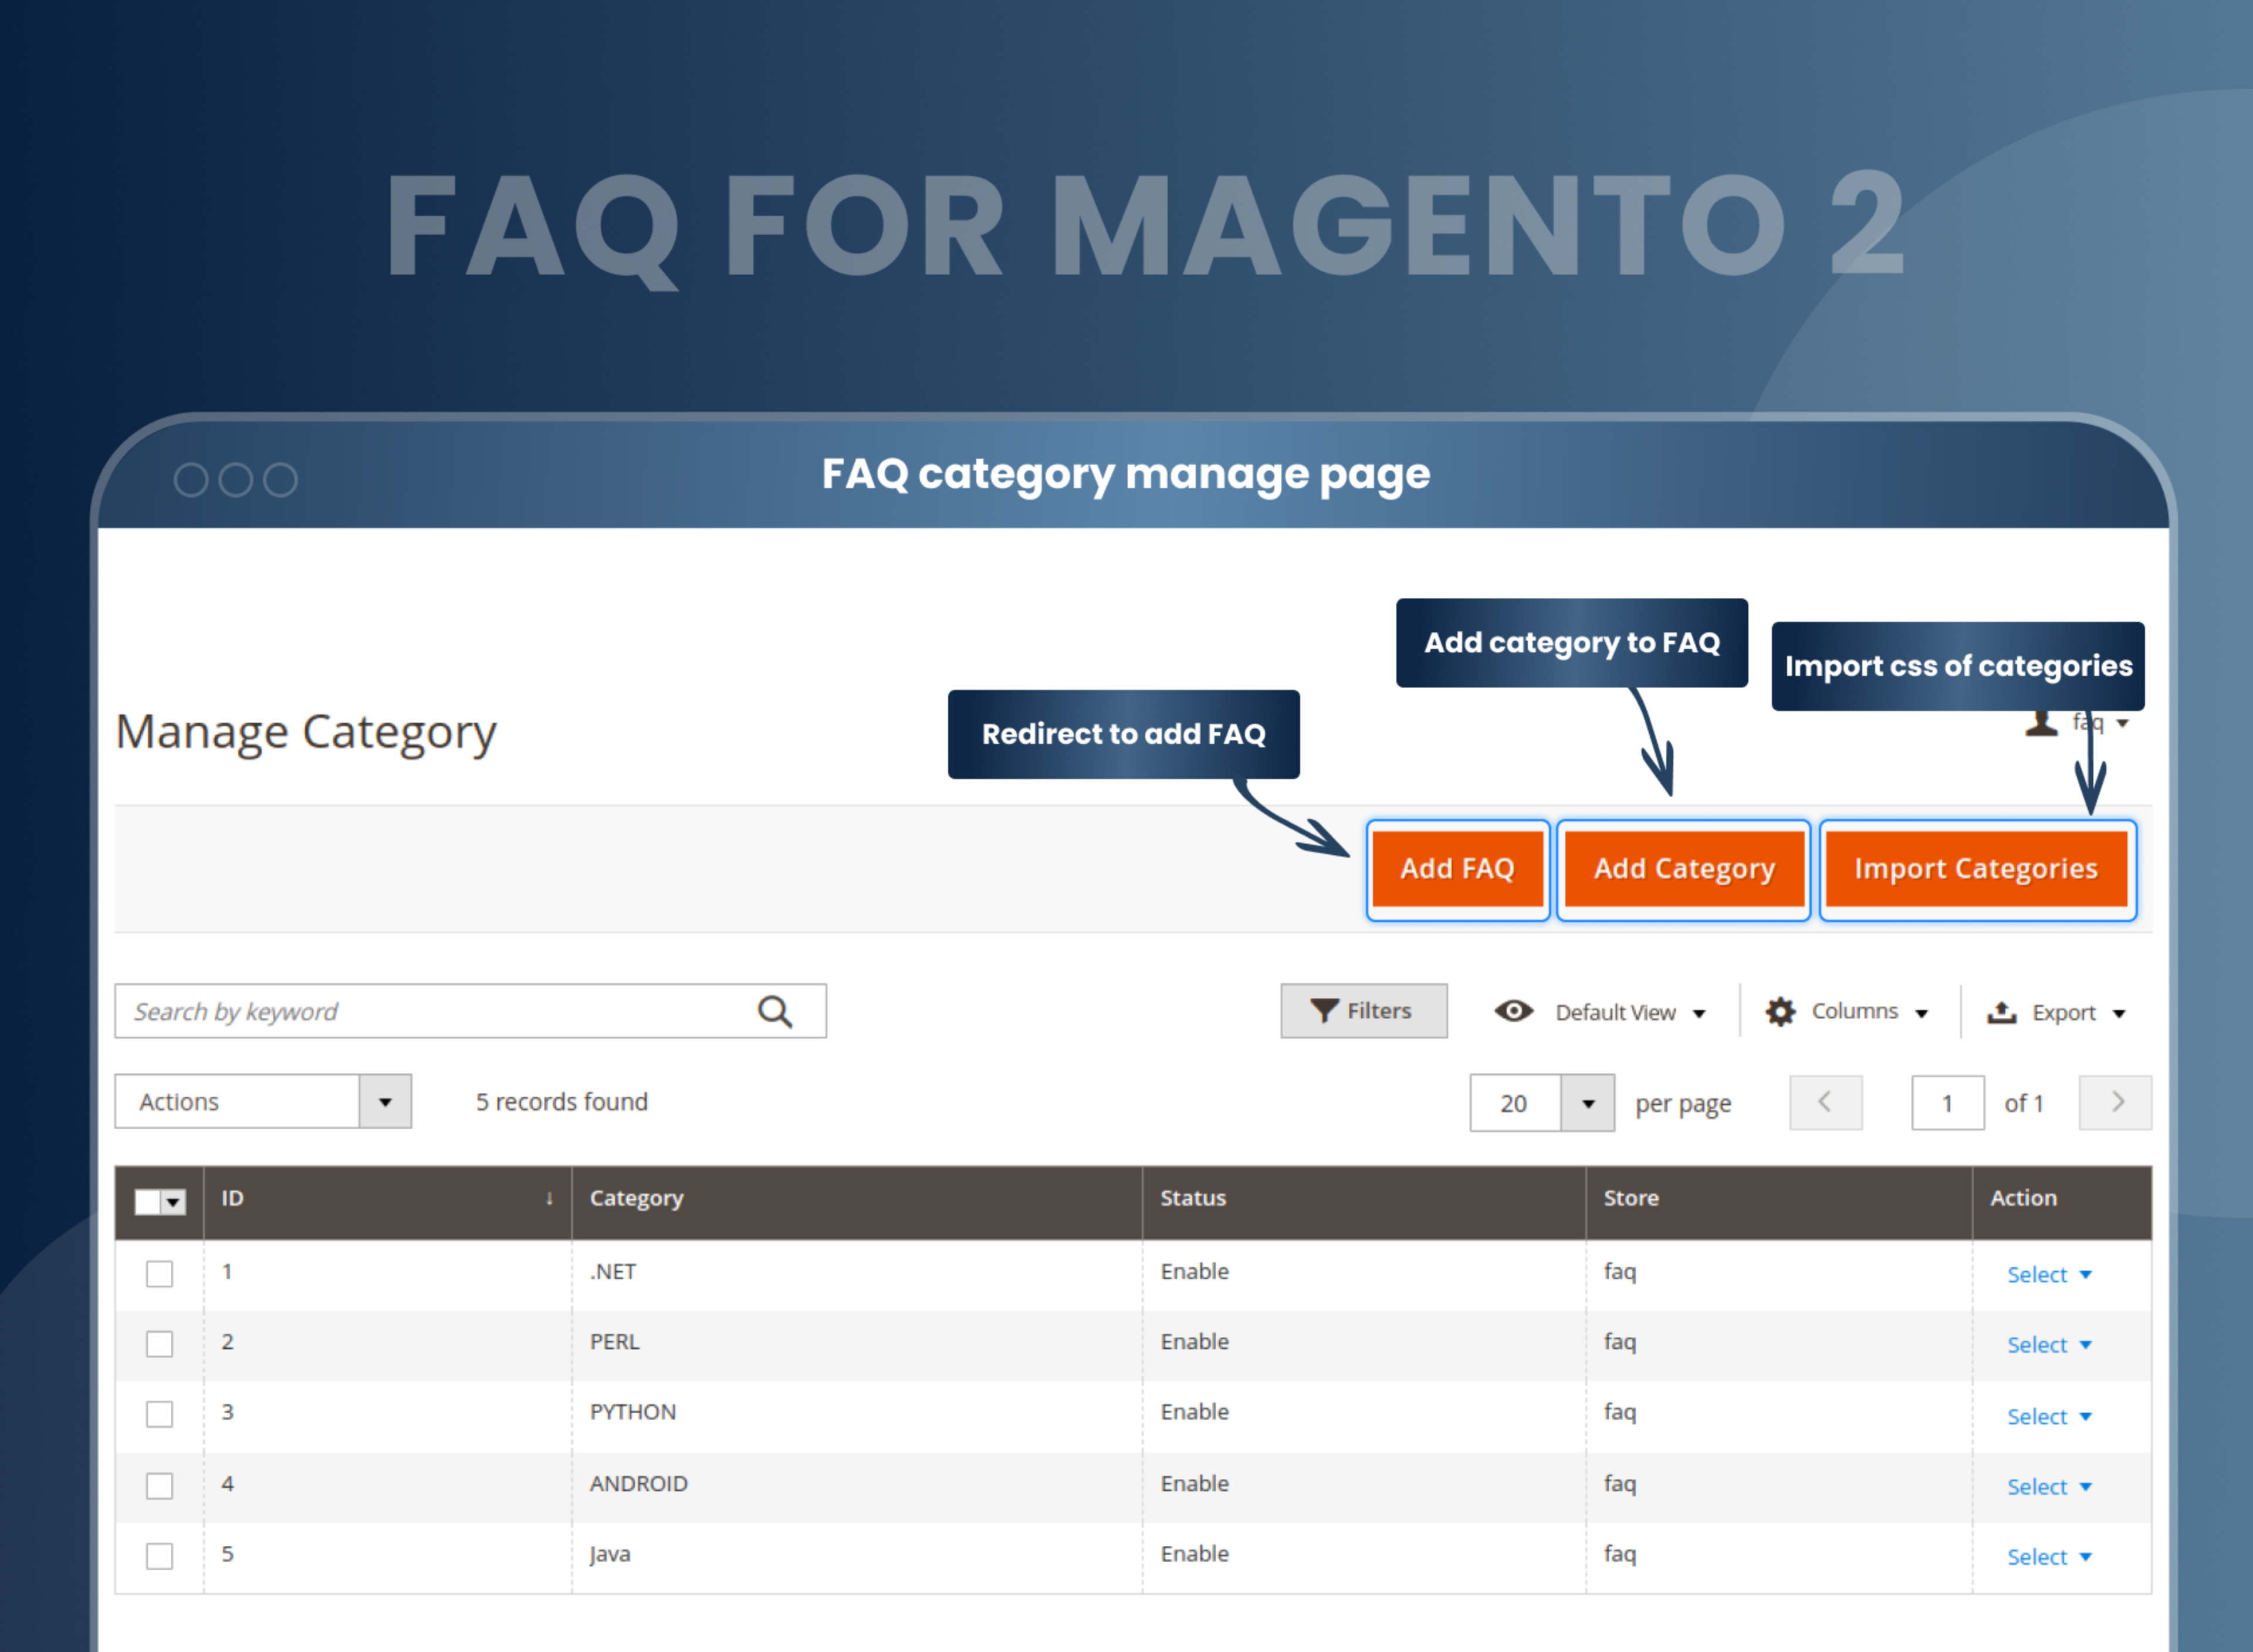 FAQ category manage page